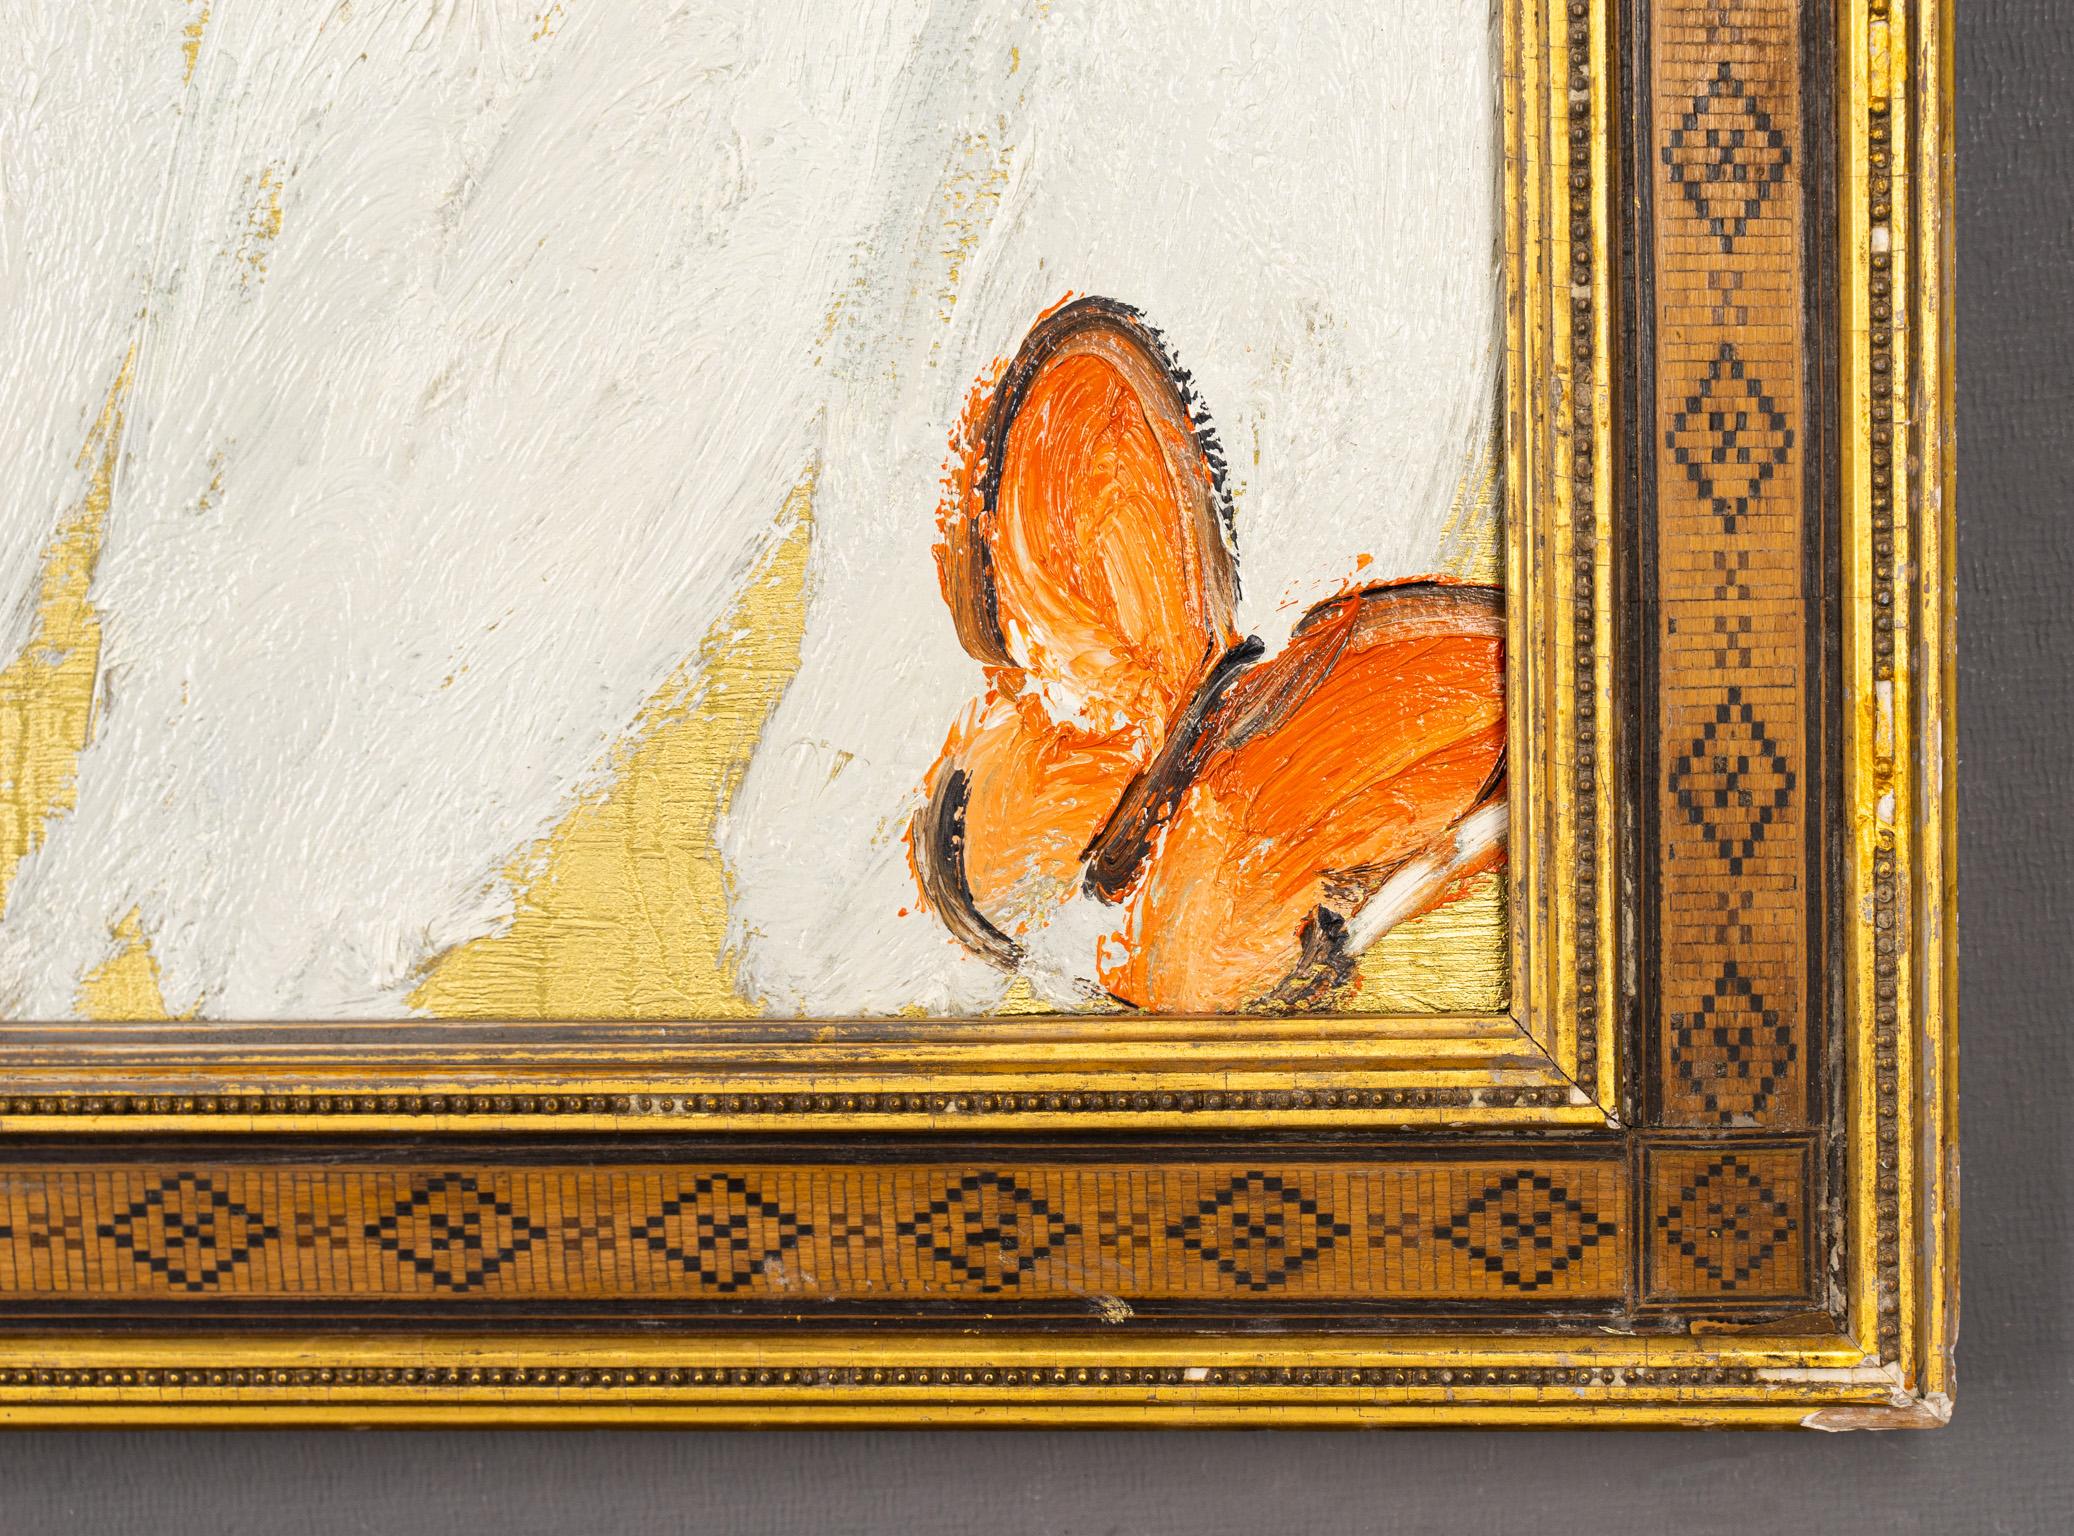 This oil painting on wood by Hunt Slonem is framed in an antique frame with patina. The price reflects the framed piece. Unframed dimensions: 36 x 45.75 inches.  

Inspired by nature and his 60 pet birds, Hunt Slonem is renowned for his distinct